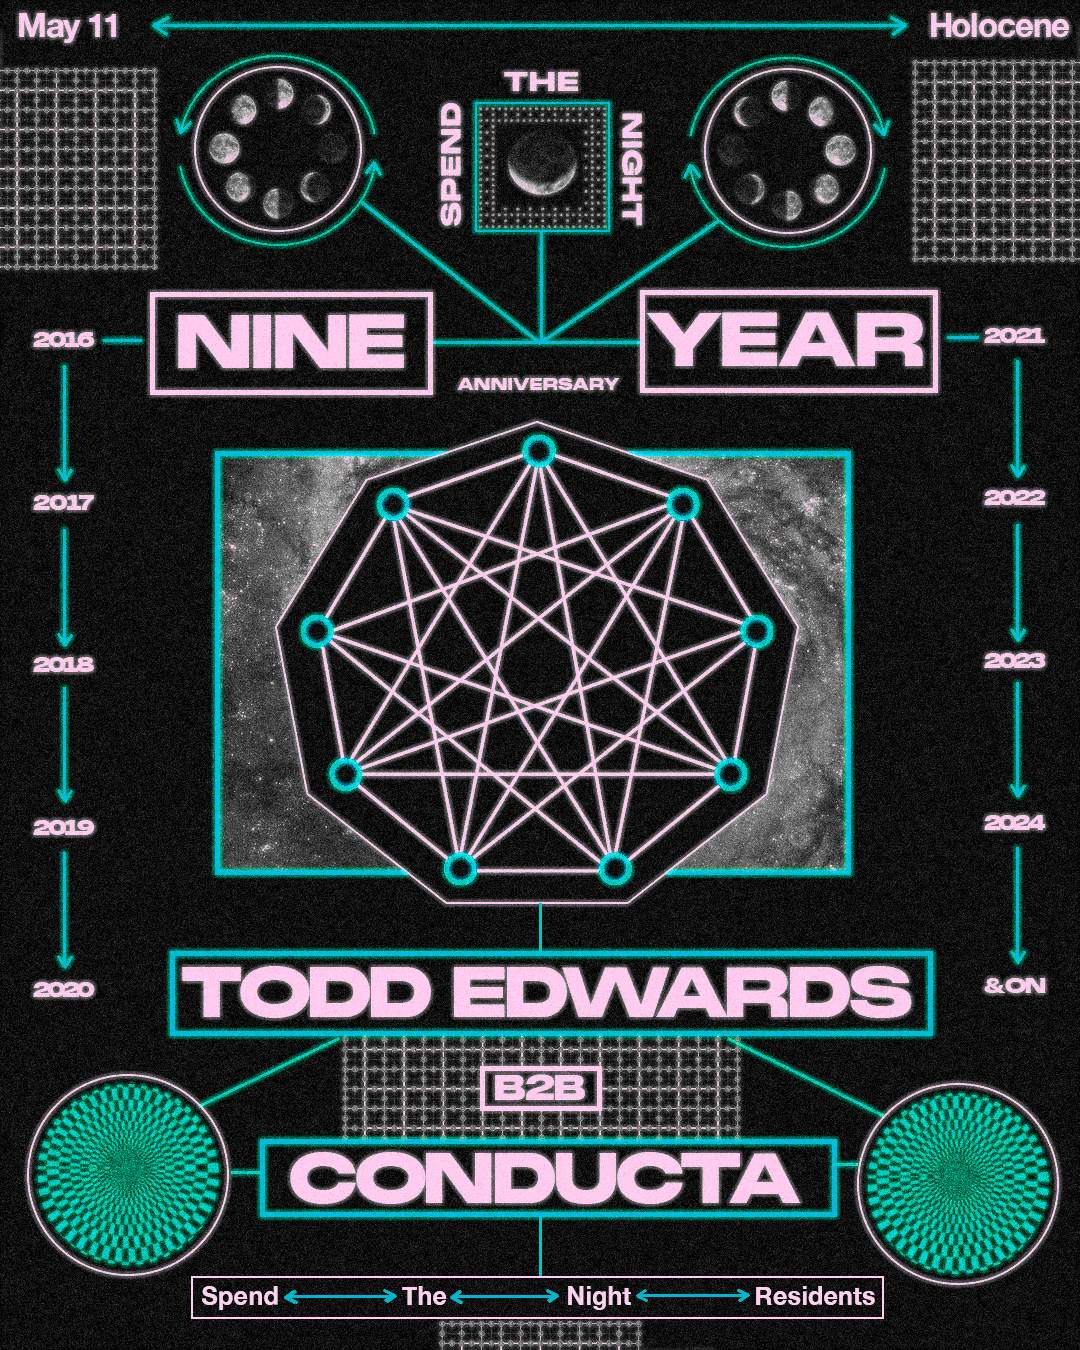 Spend The Night 9 Year: Conducta B2B Todd Edwards - フライヤー表